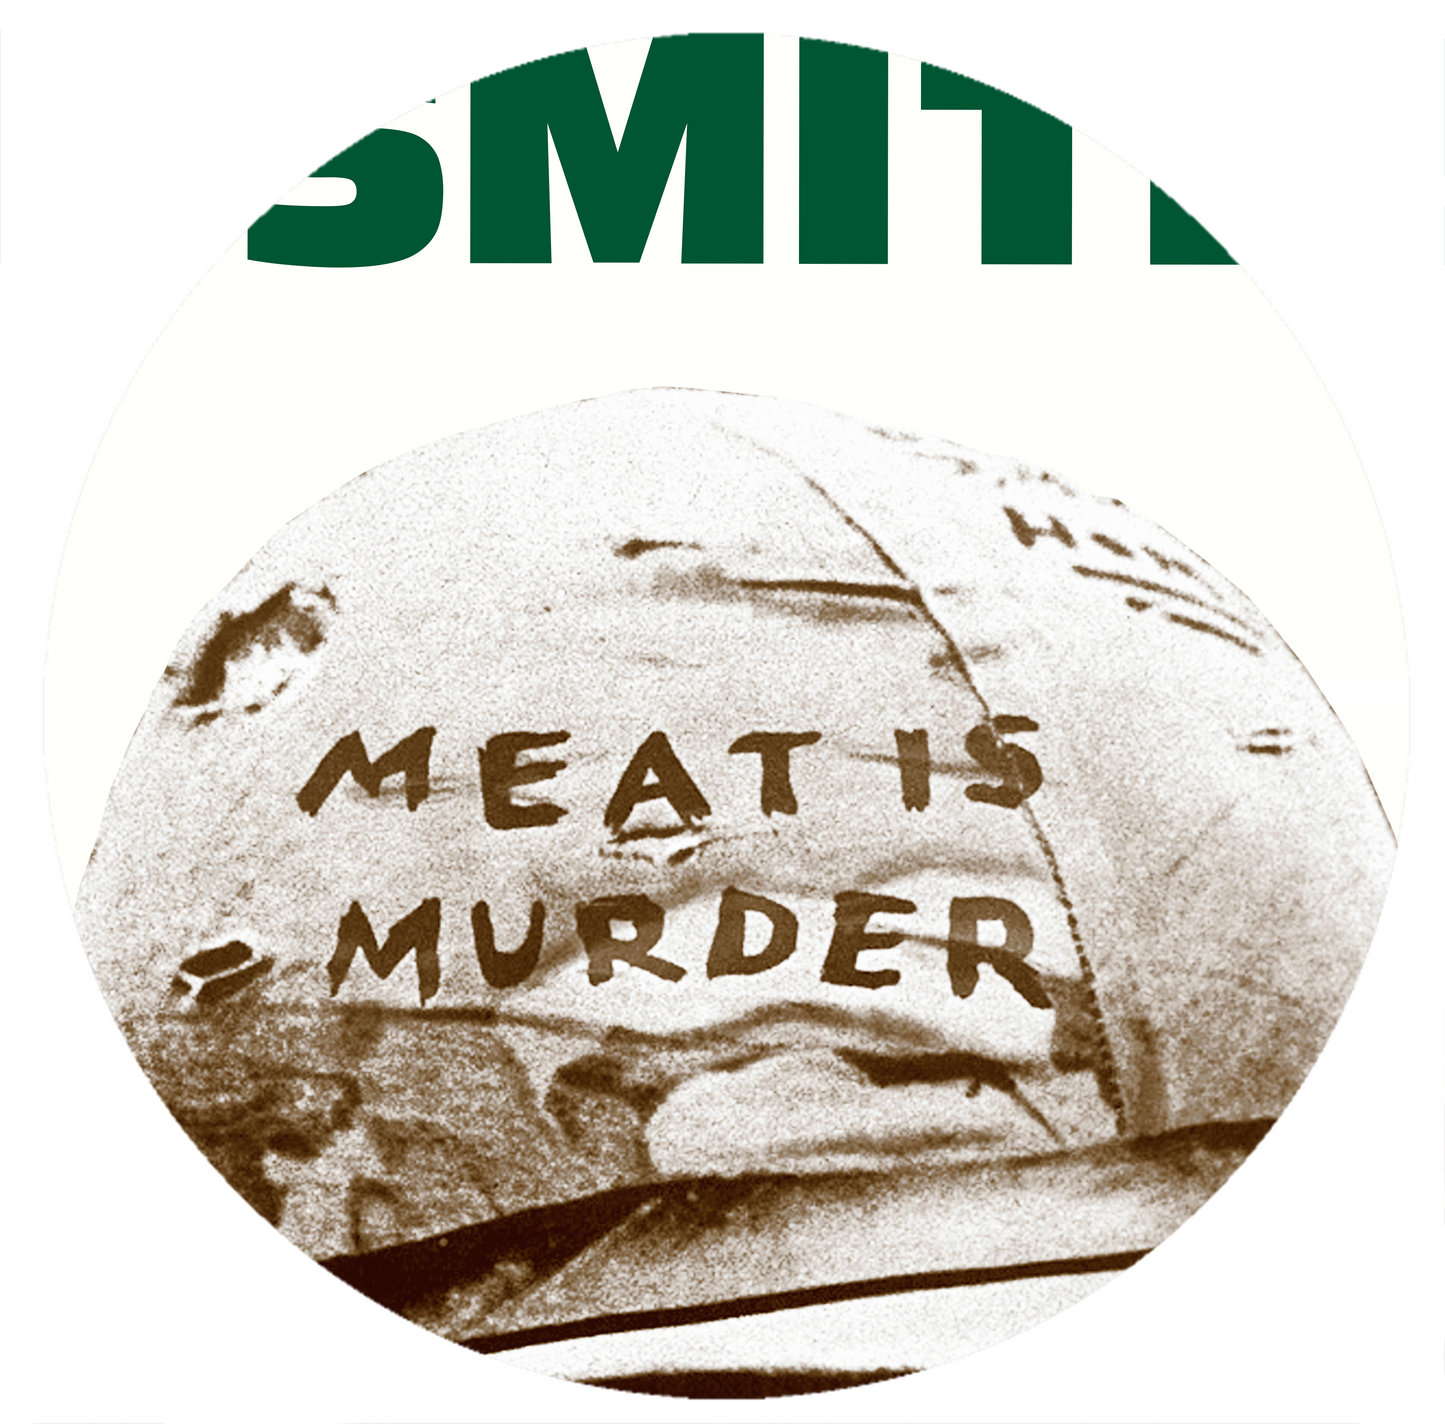 THE SMITHS - MEAT IS MURDER - Green Text